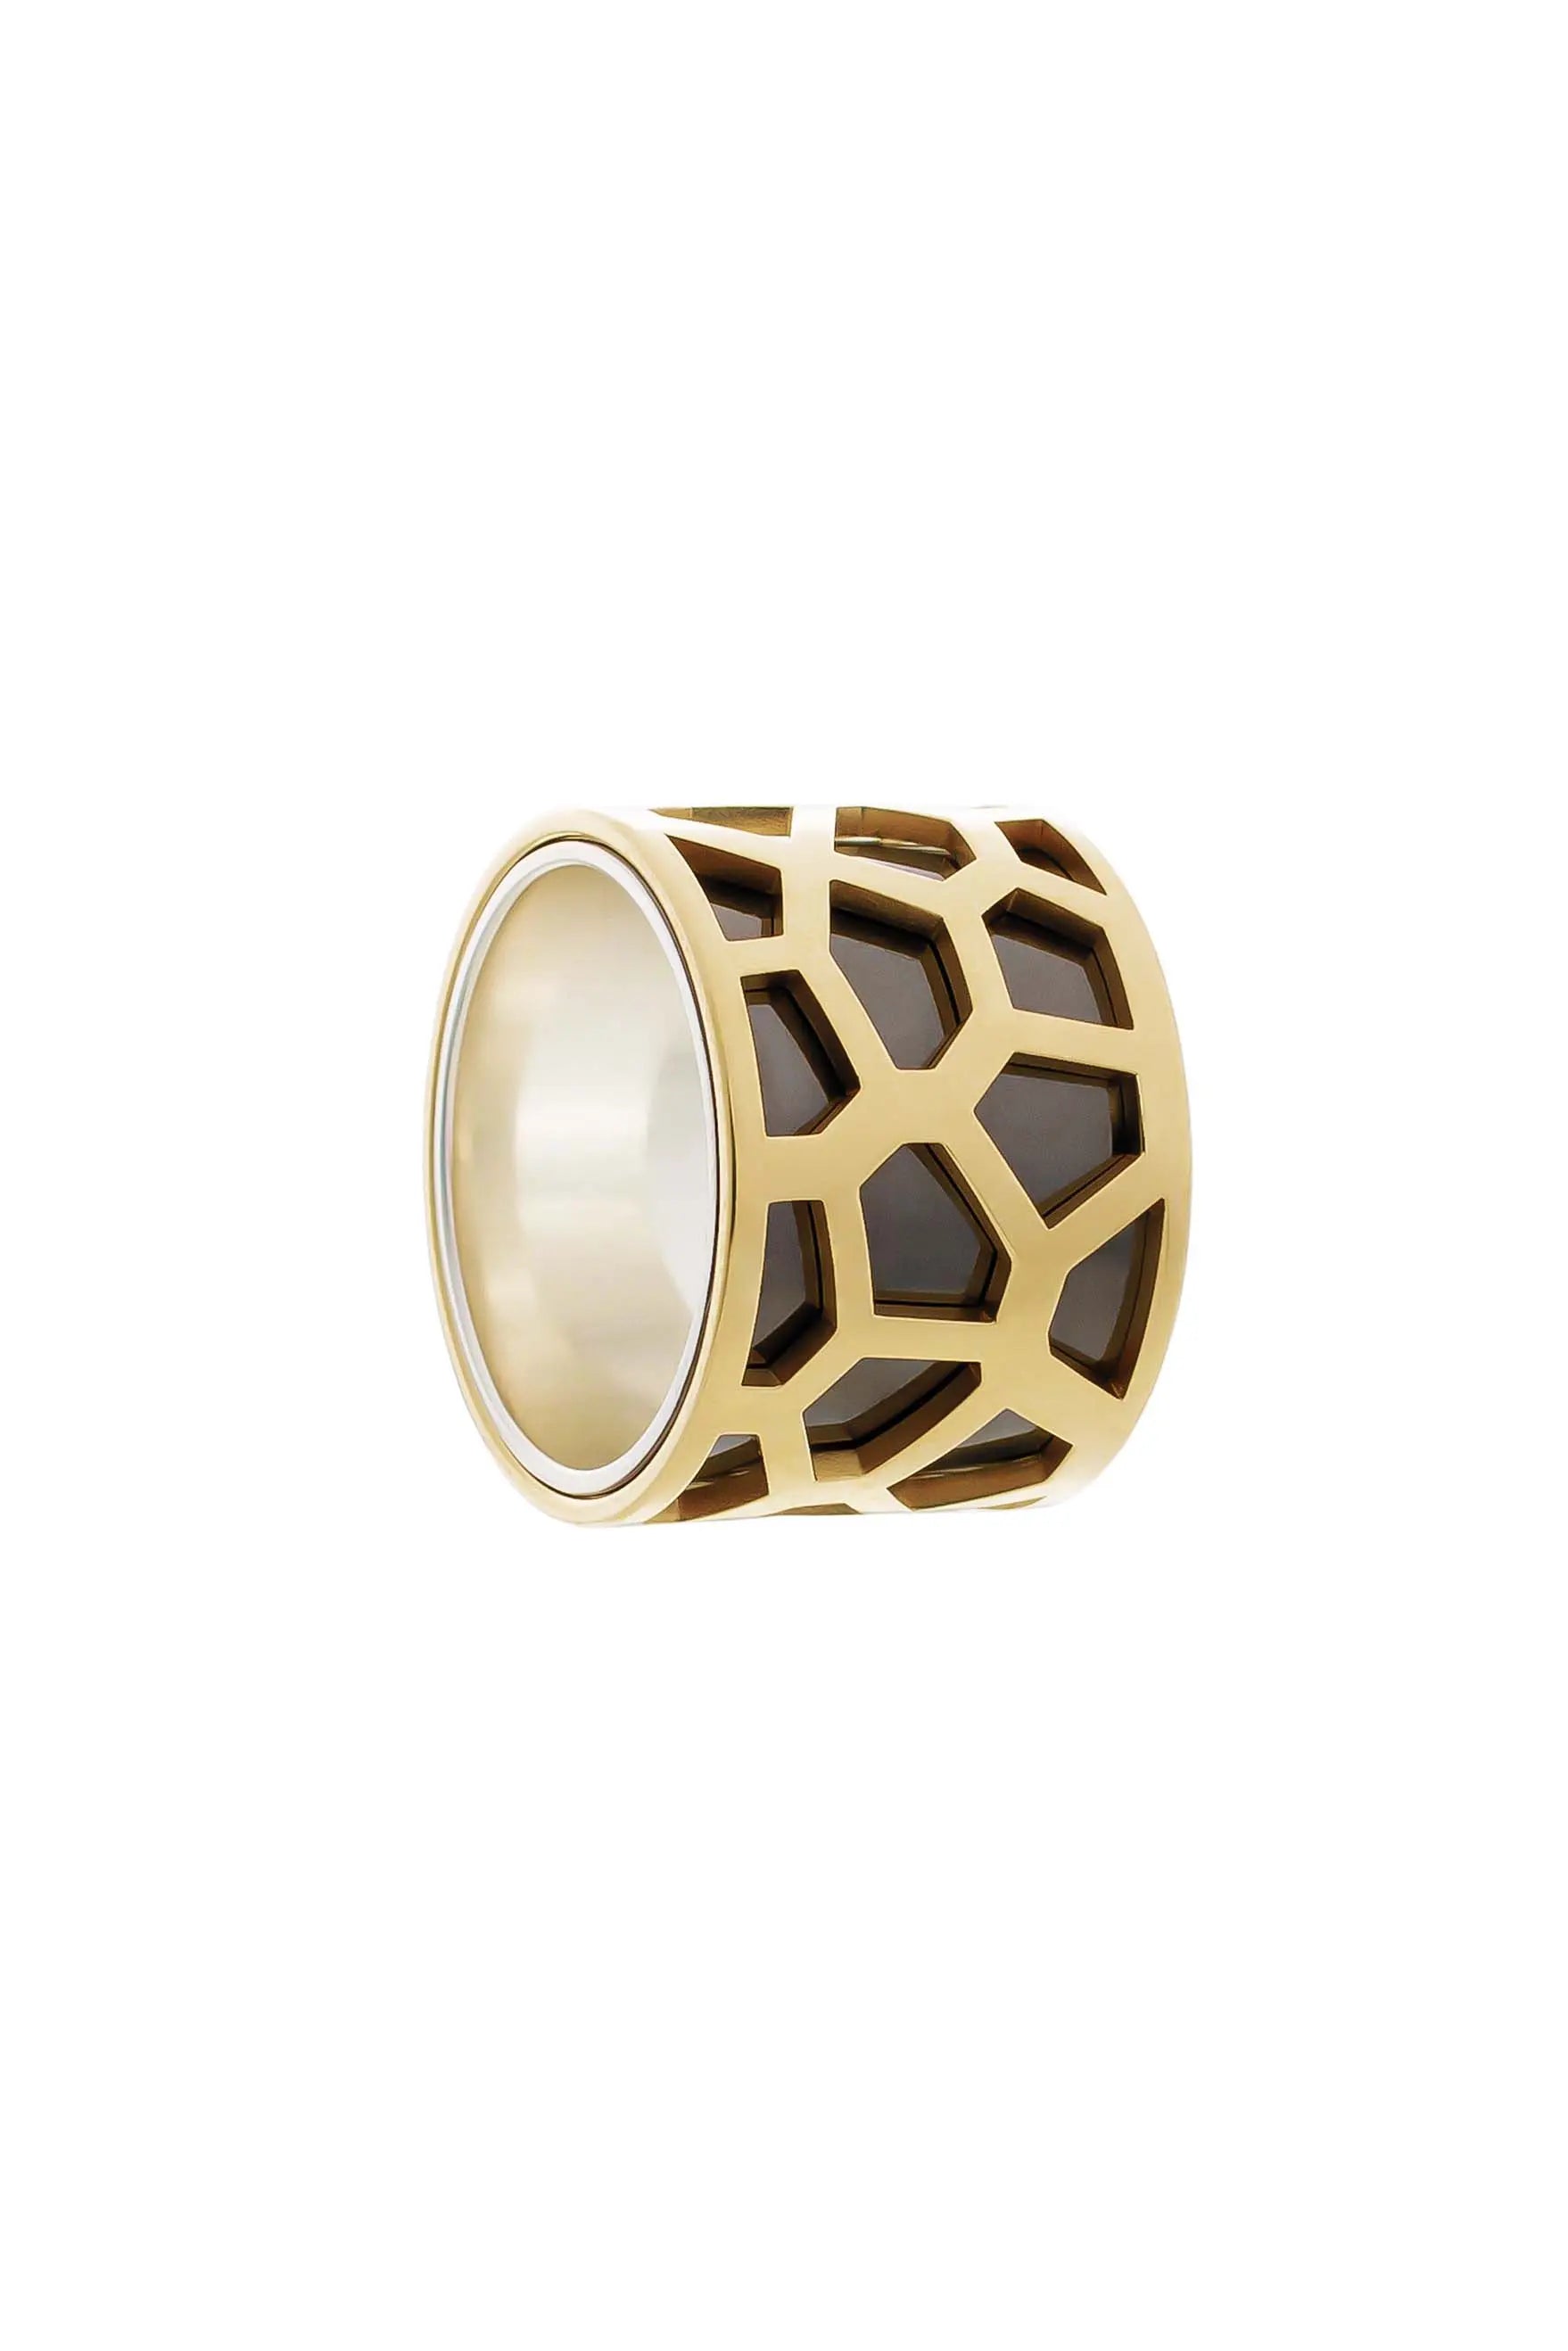 Solid tall ring - CDD Jewelry